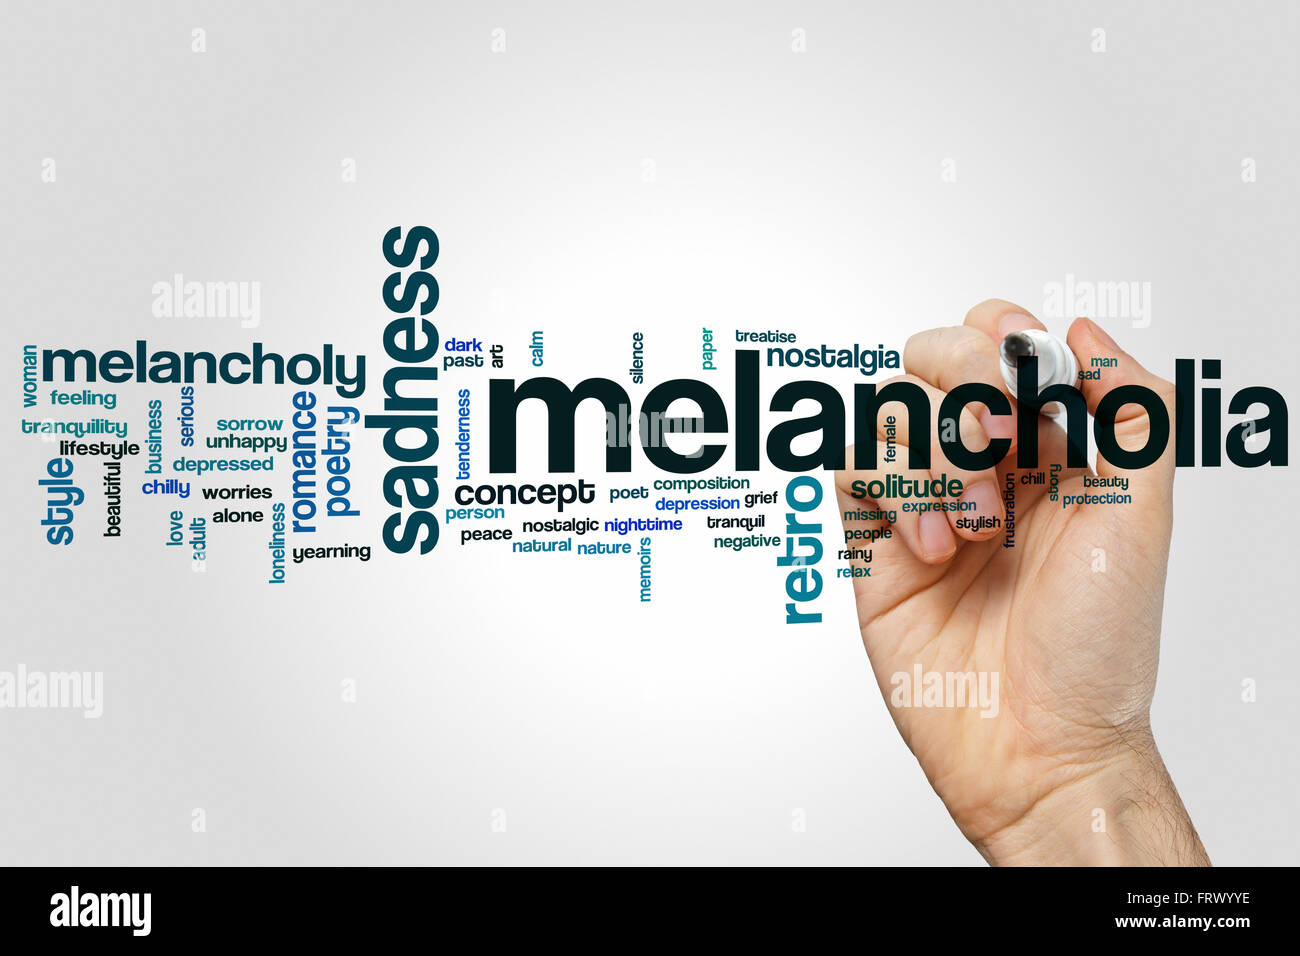 Melancholia word cloud concept with sad poet related tags Stock Photo